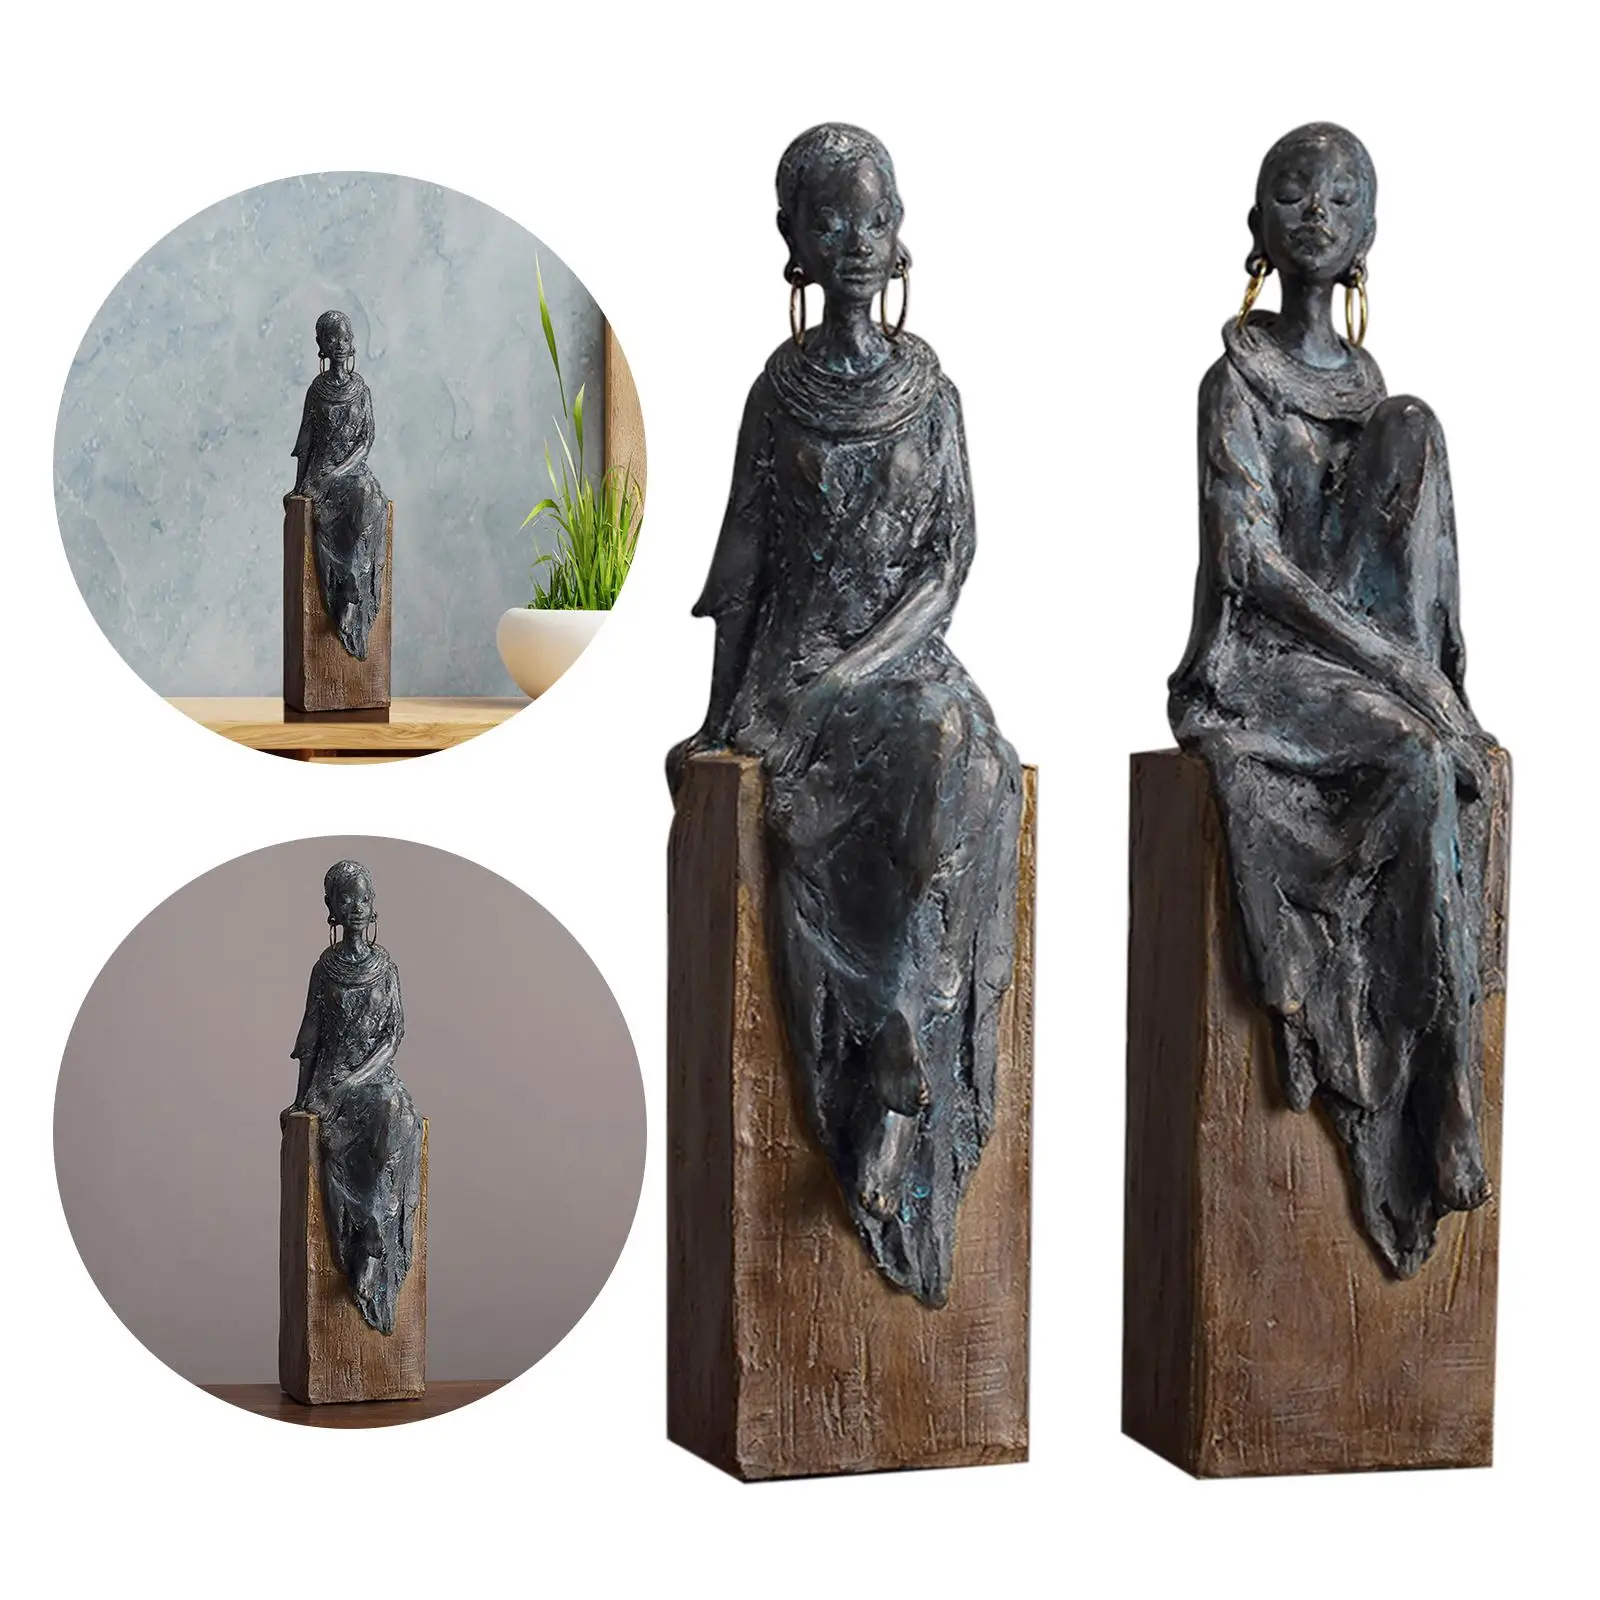 African Lady Women Ornament Tribal Figures Resin Crafts Gift Desktop Ornaments Home Figurines Sculpture Statue